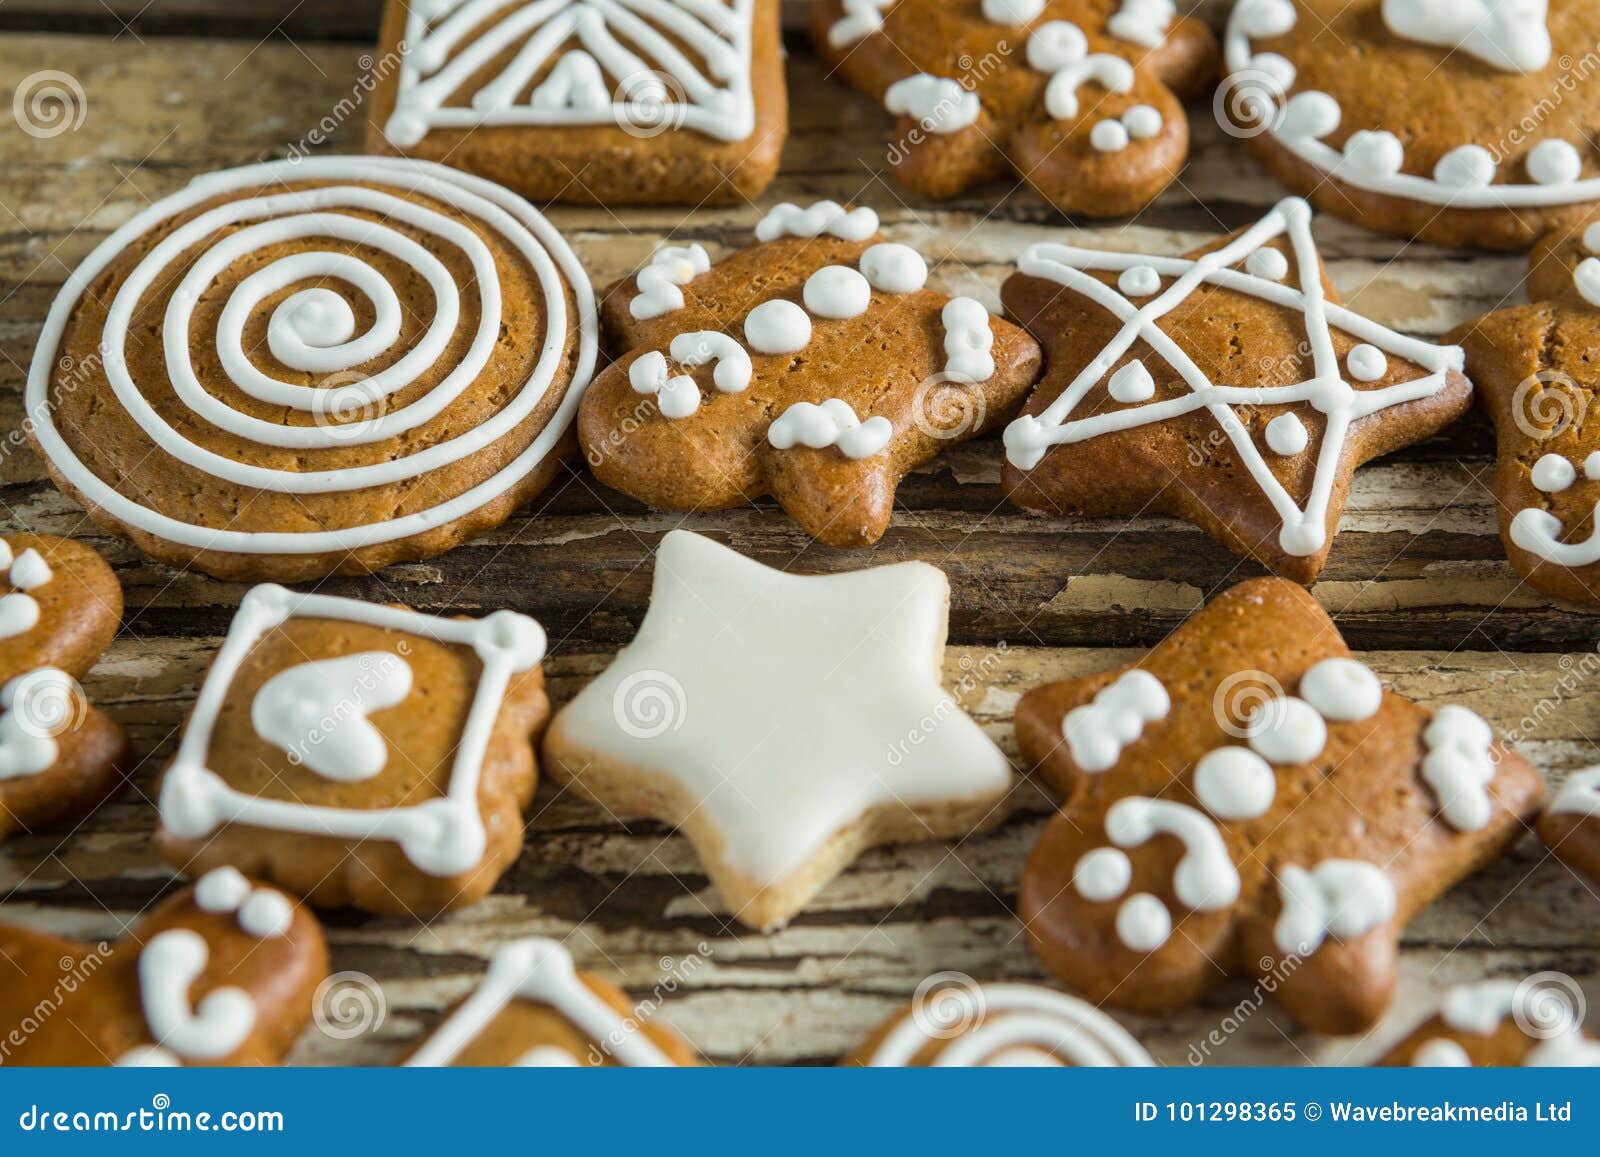 Gingerbread Cookies Arranged on Wooden Plank Stock Image - Image of ...